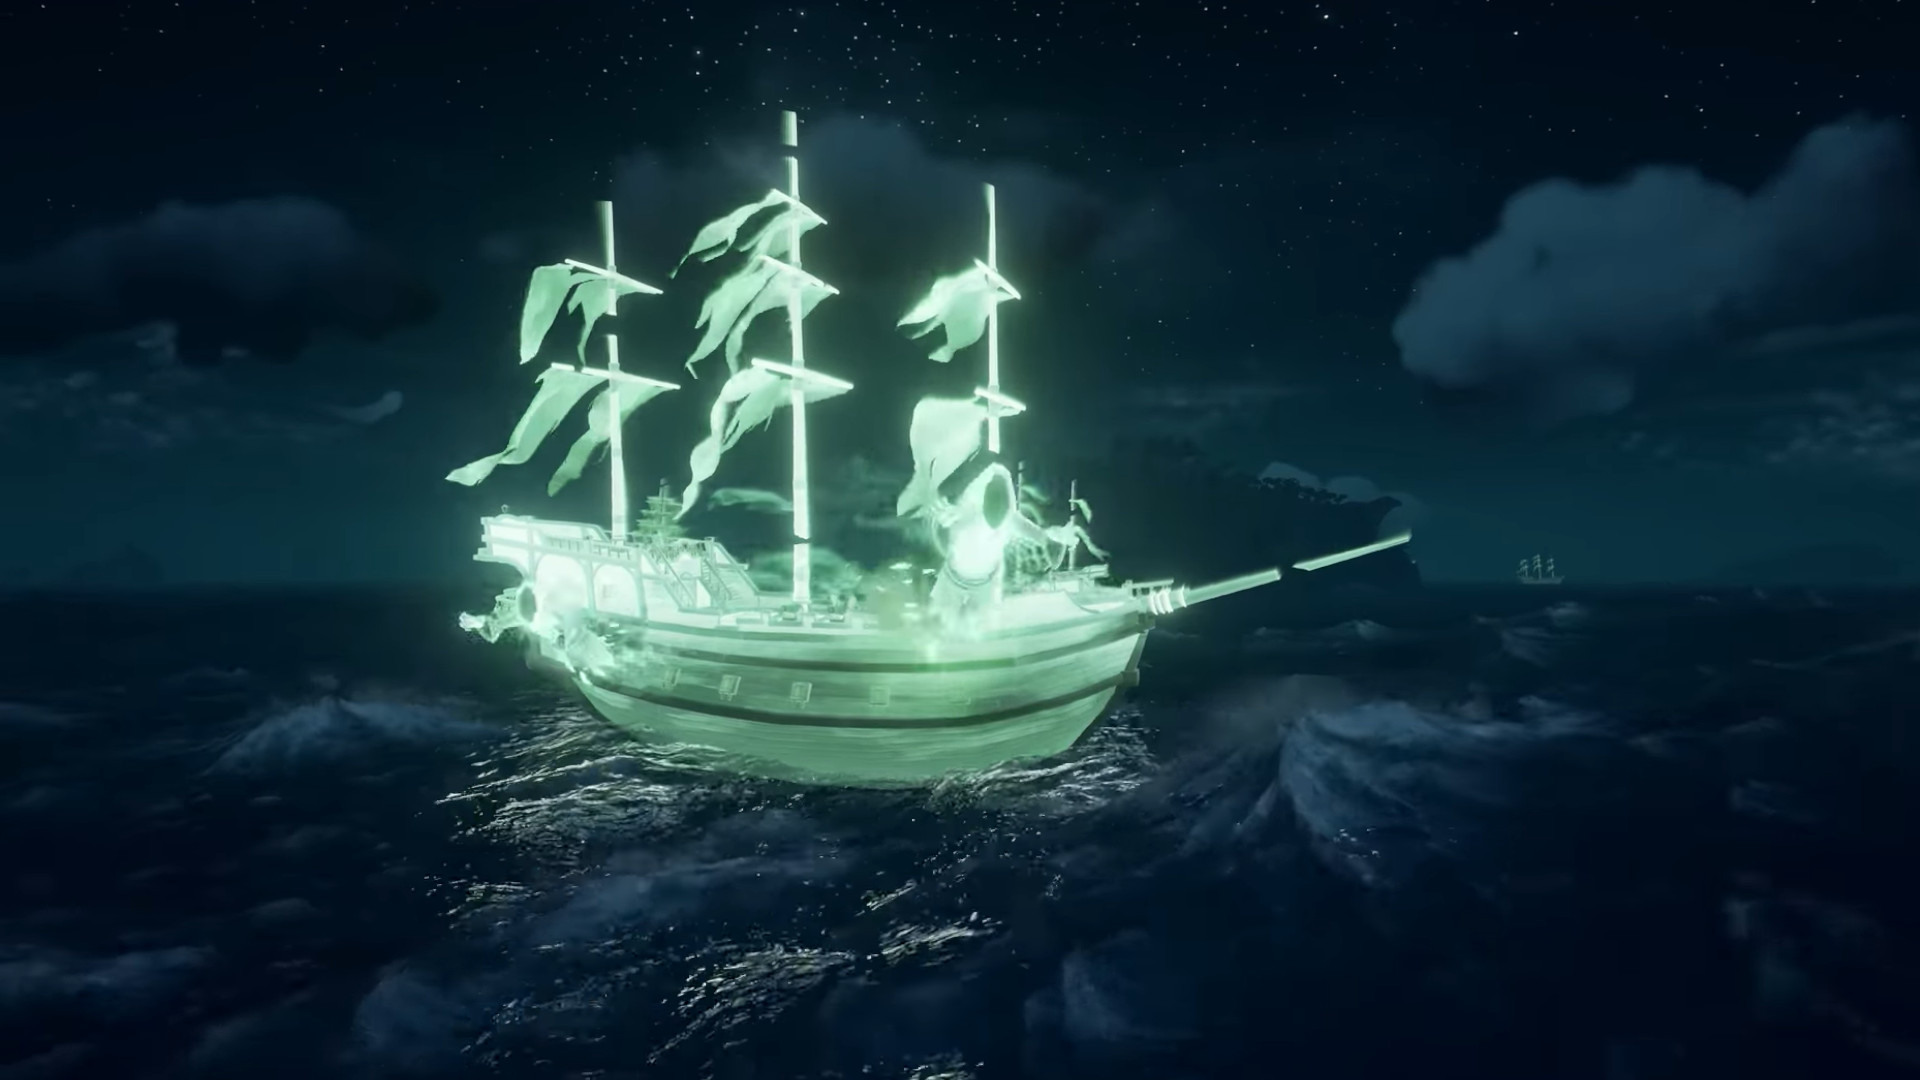 Sea of Thieves: Haunted Shores adds ghost ships and vastly improves